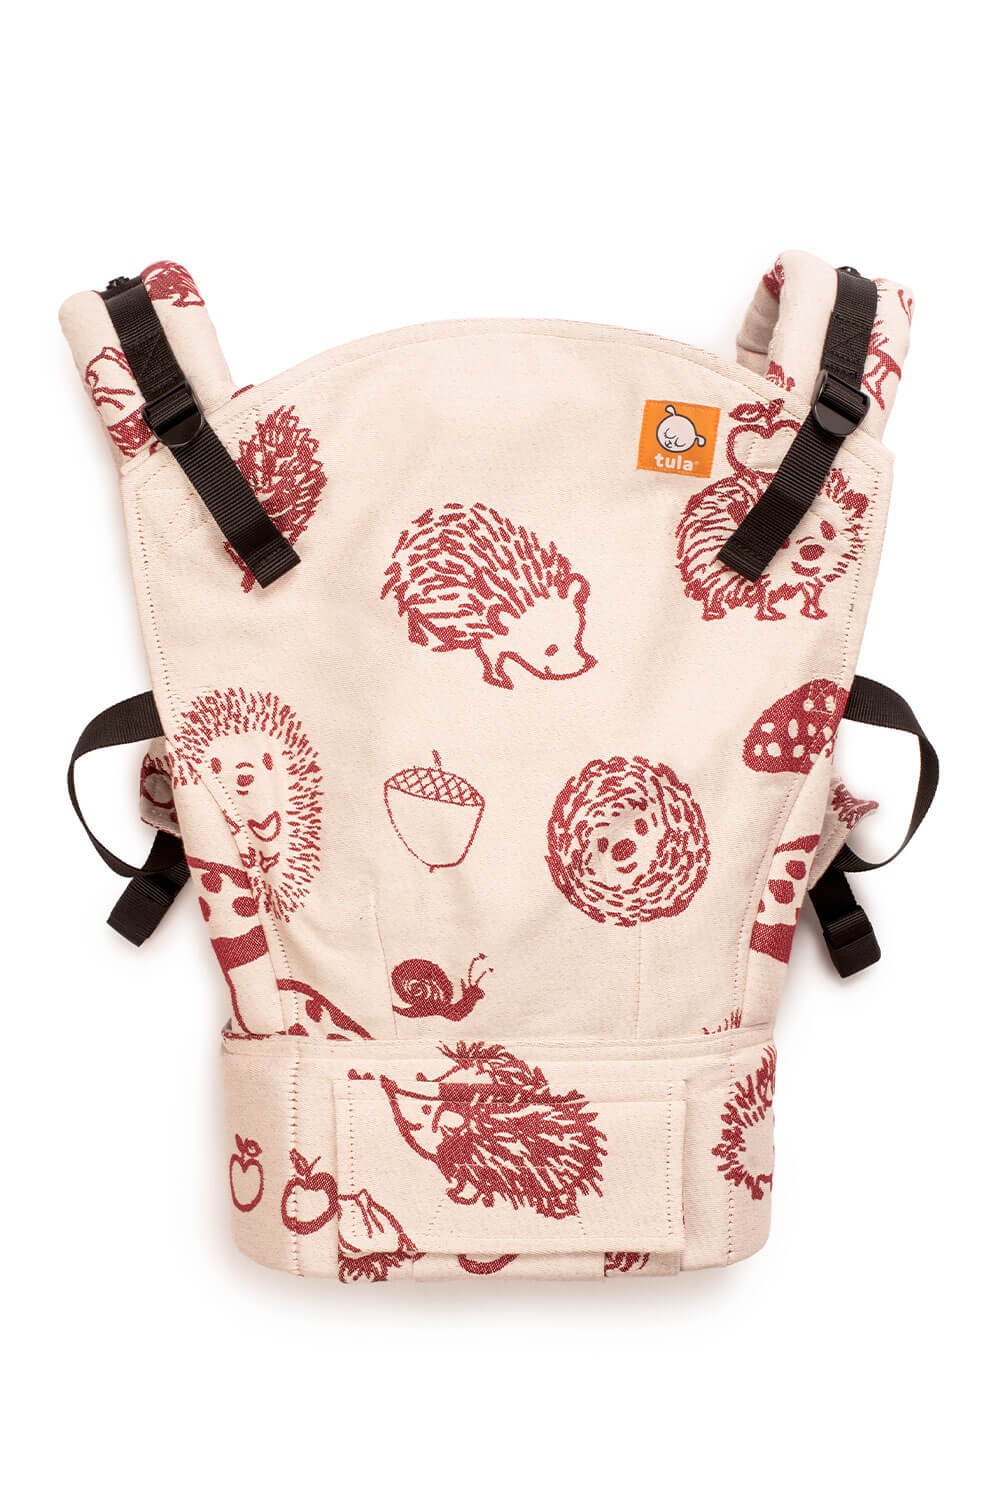 Tup Tup Bordeaux - Signature Woven Standard Baby Carrier